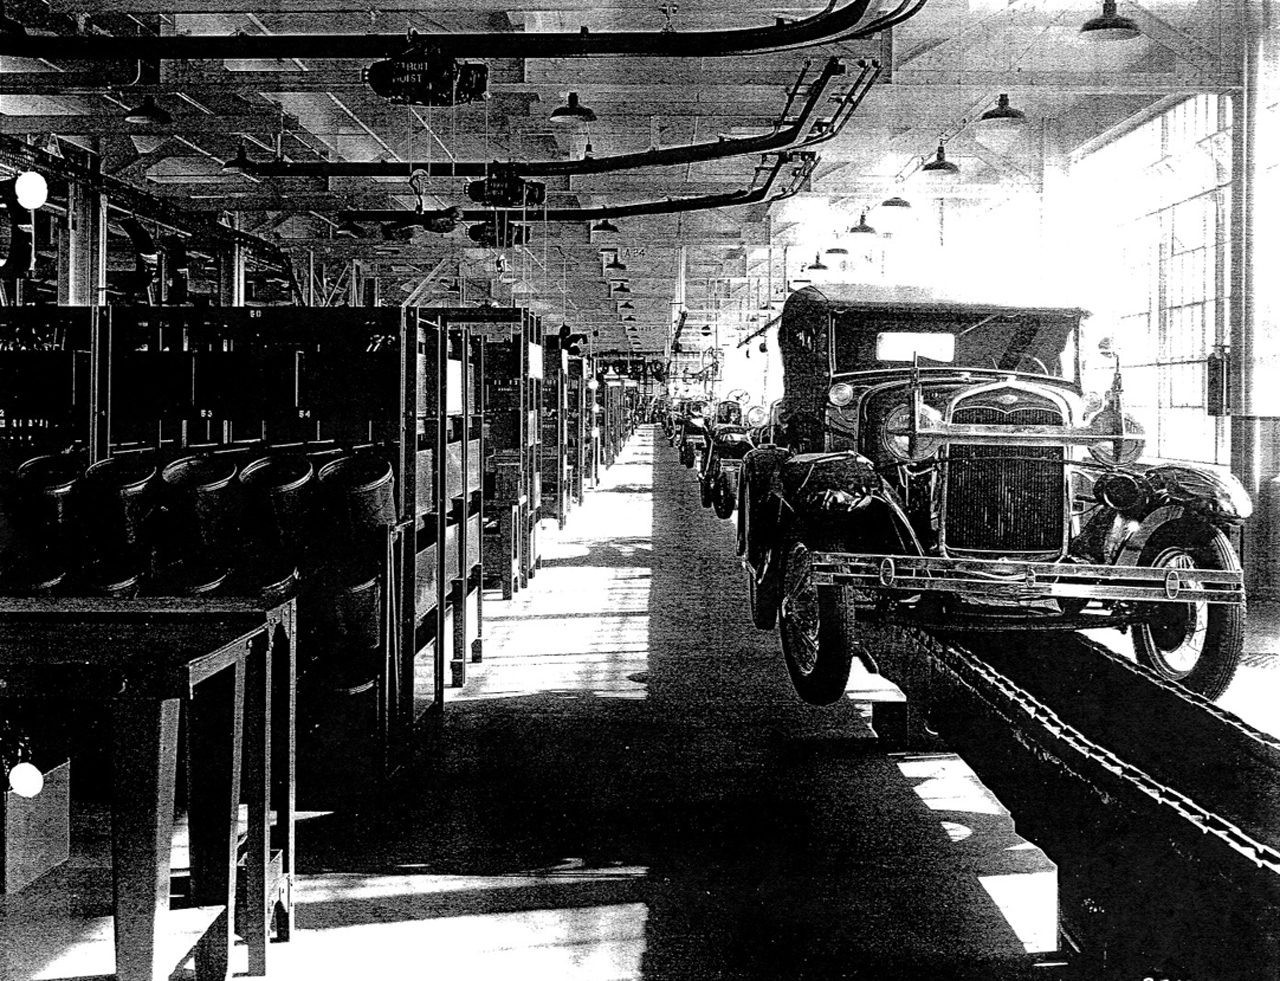 Assembly line 1920s henry ford #5